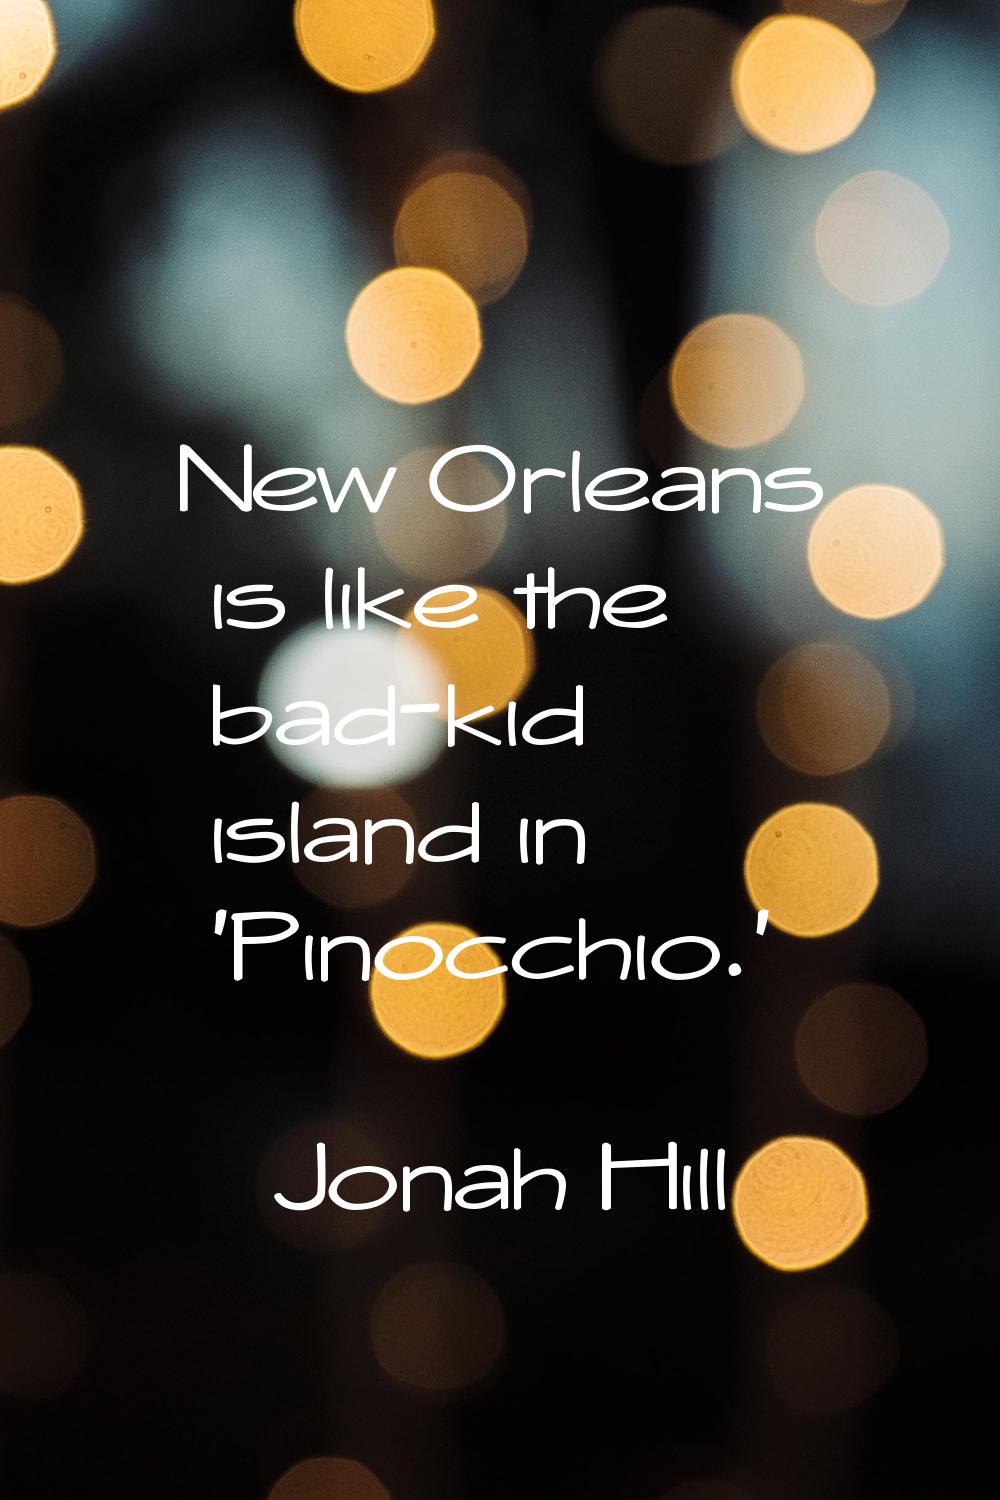 New Orleans is like the bad-kid island in 'Pinocchio.'